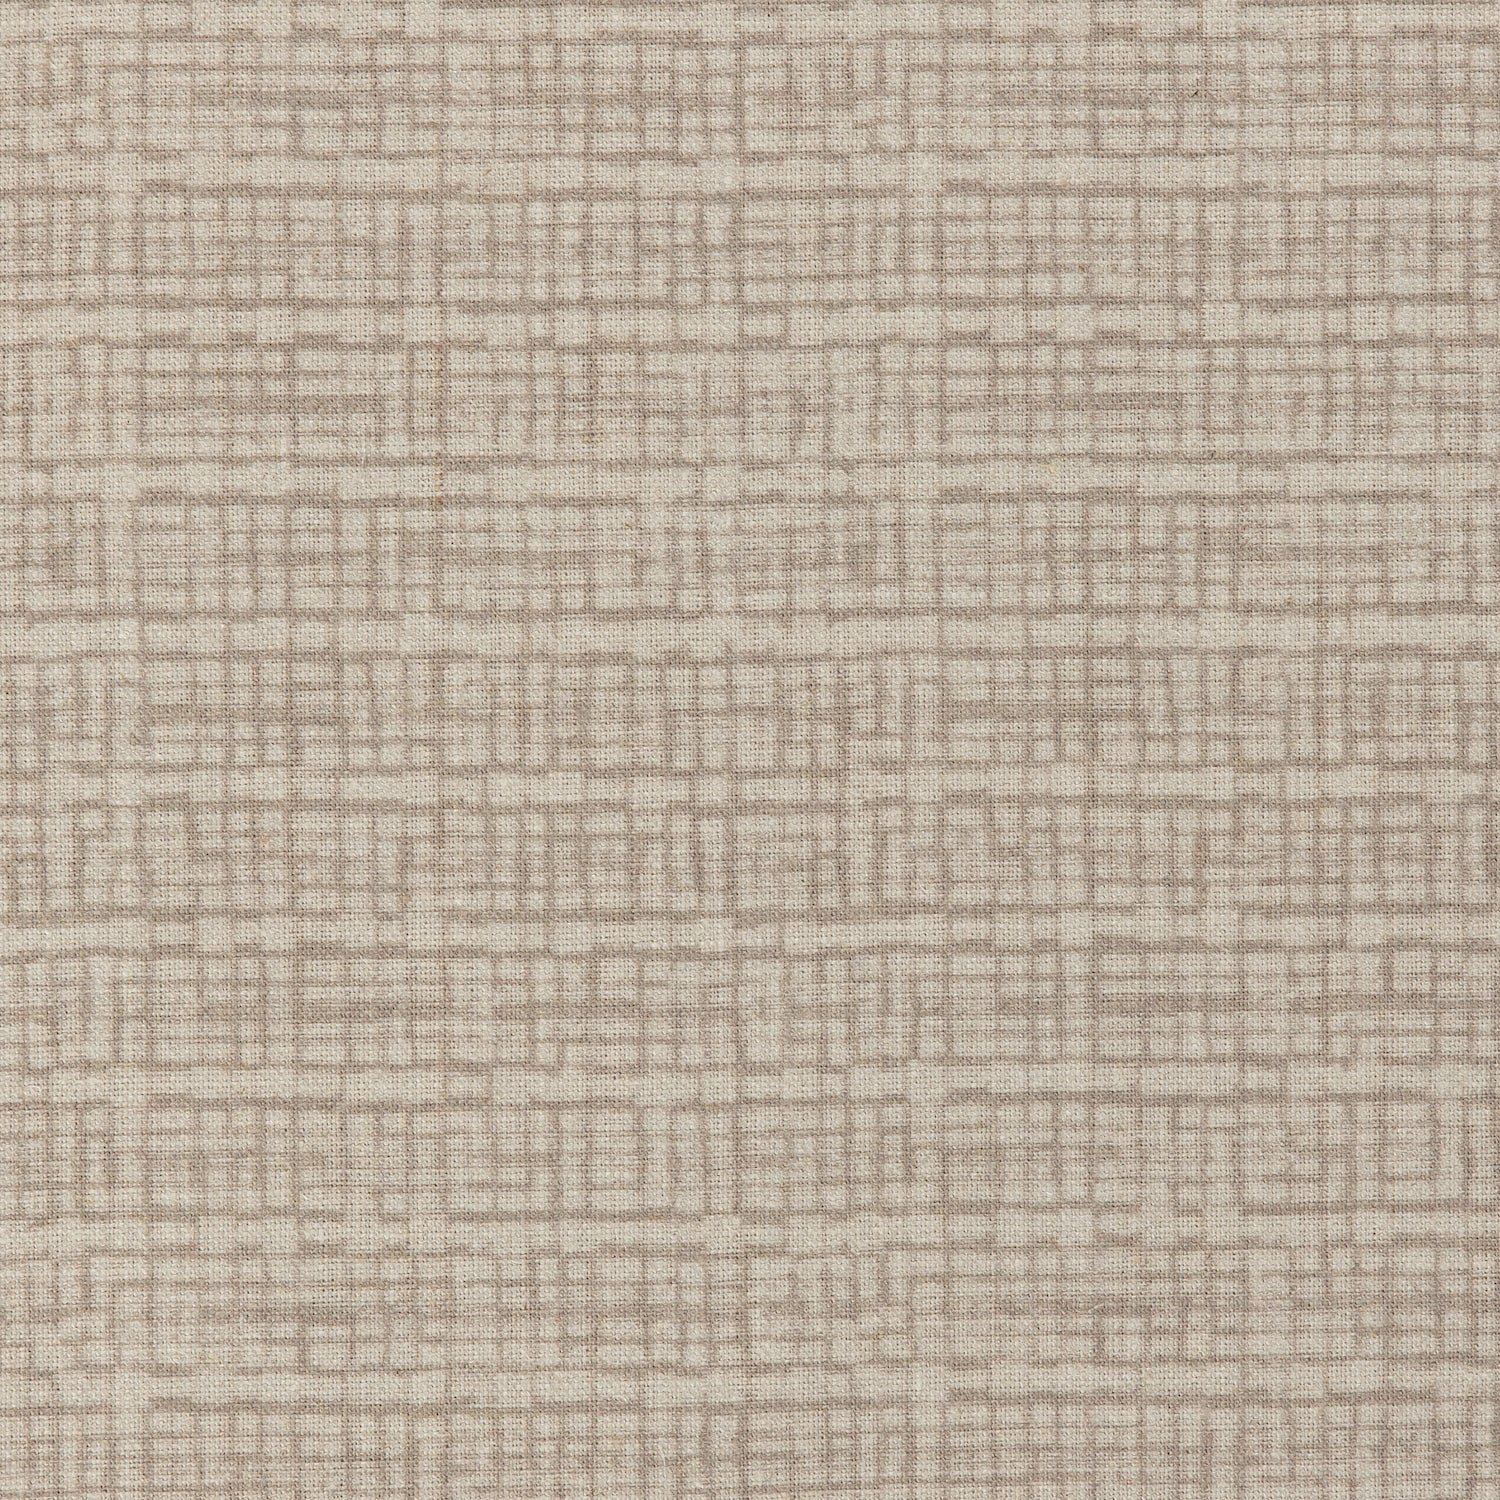 Detail of a linen fabric in a repeating abstract gridded pattern in beige on a cream field.